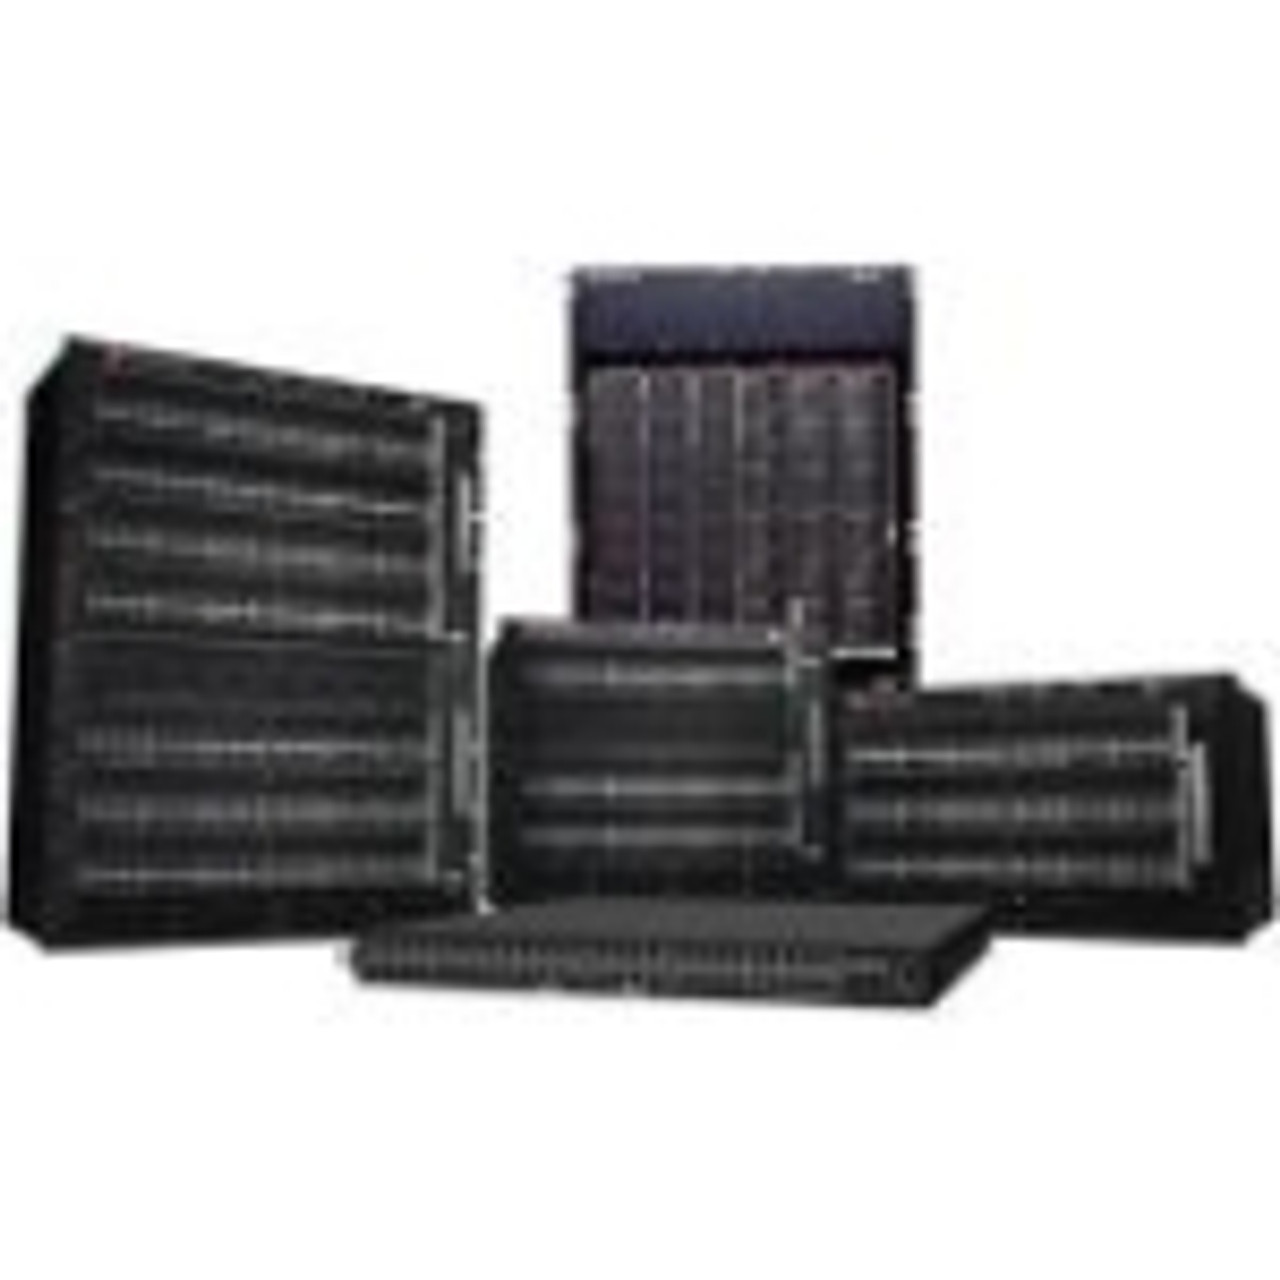 S3-CHASSIS-A Extreme Networks Switch Chassis Manageable 3 x Expansion Slots Modular 3 x Expansion Slot 3 Layer Supported 7U High Rack-mountable (Refurbished)